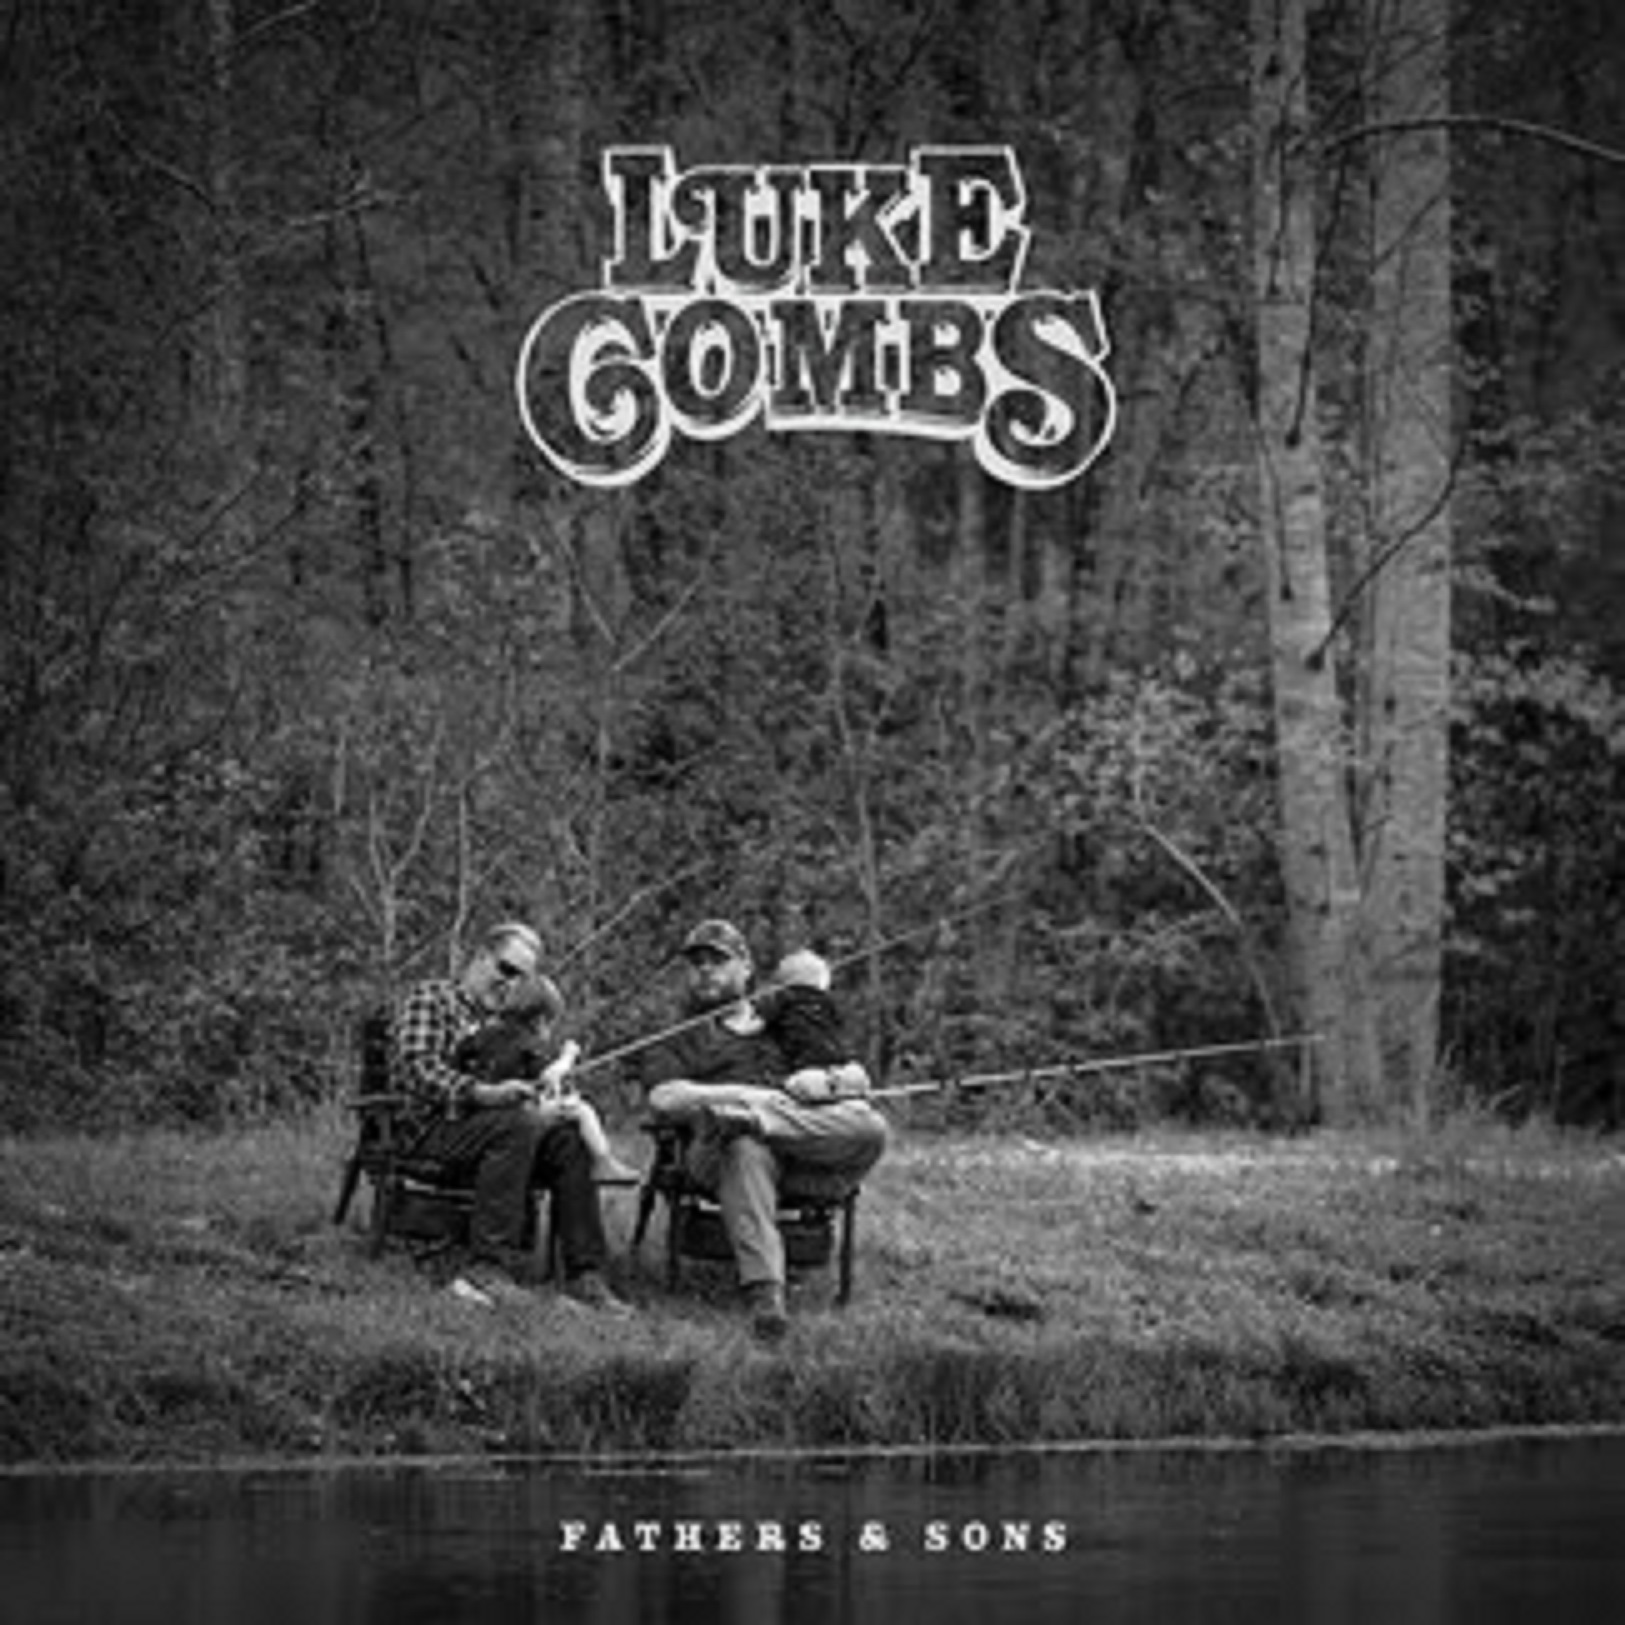 Luke Combs’ new album "Fathers & Sons" out June 14, “The Man He Sees In Me” debuts today